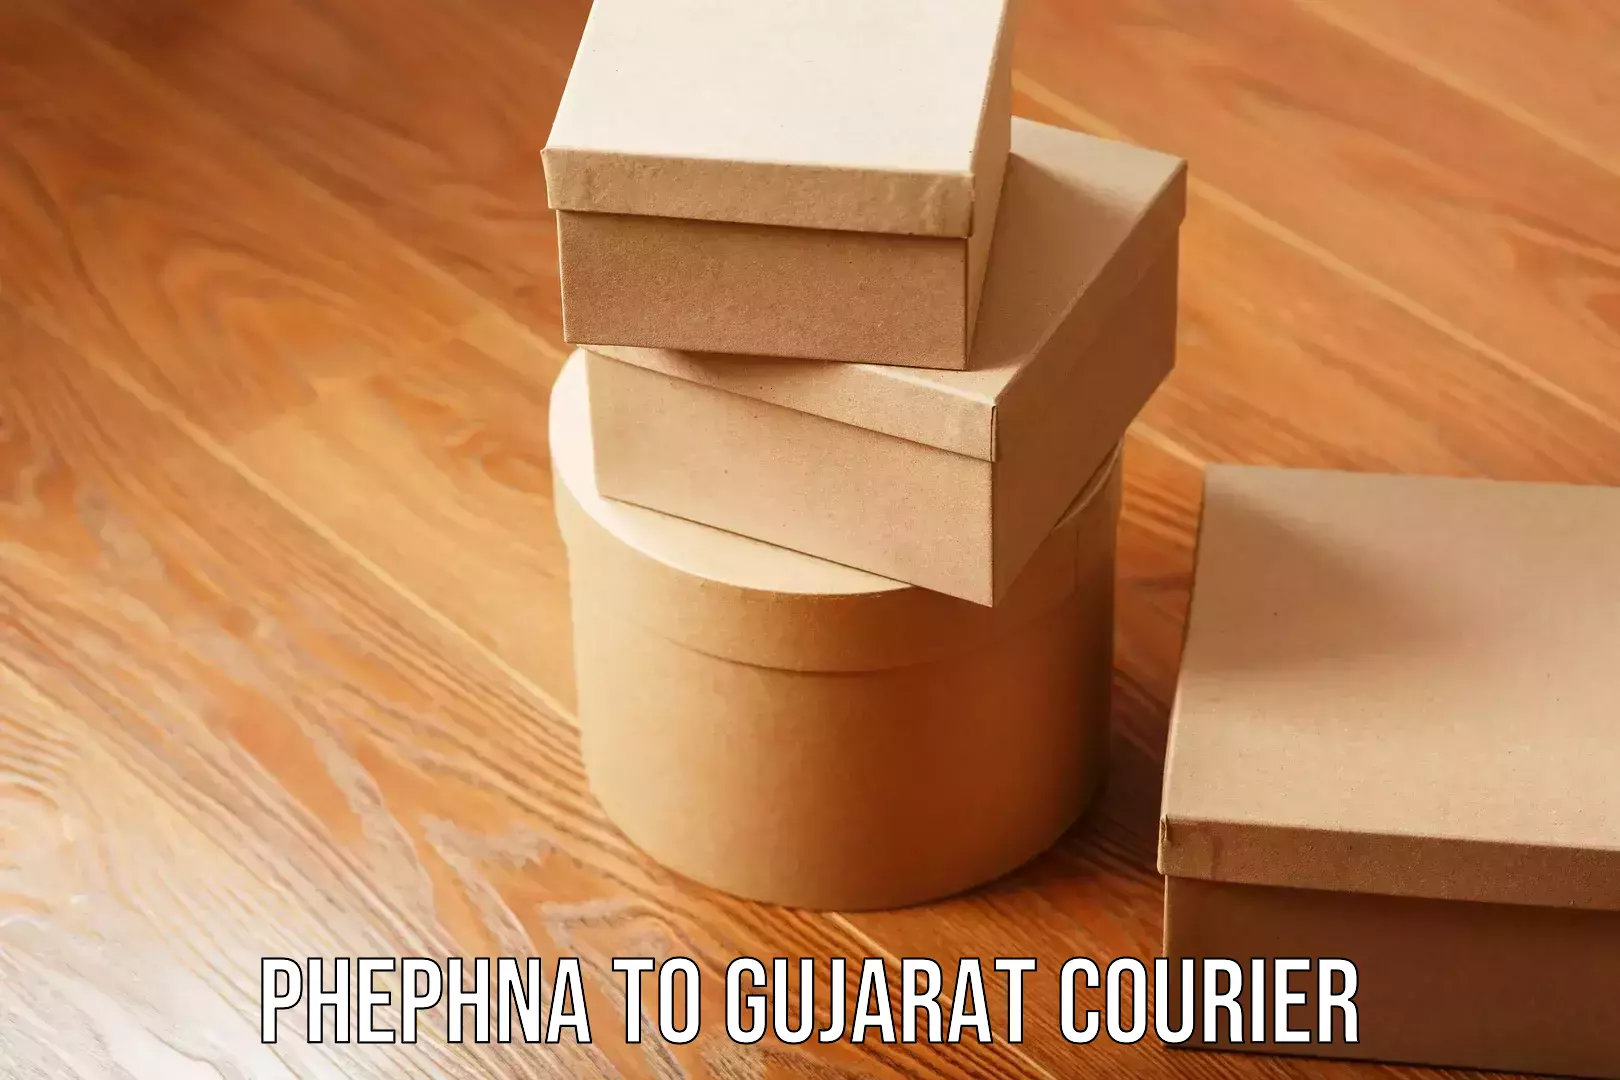 Professional moving assistance Phephna to Gujarat